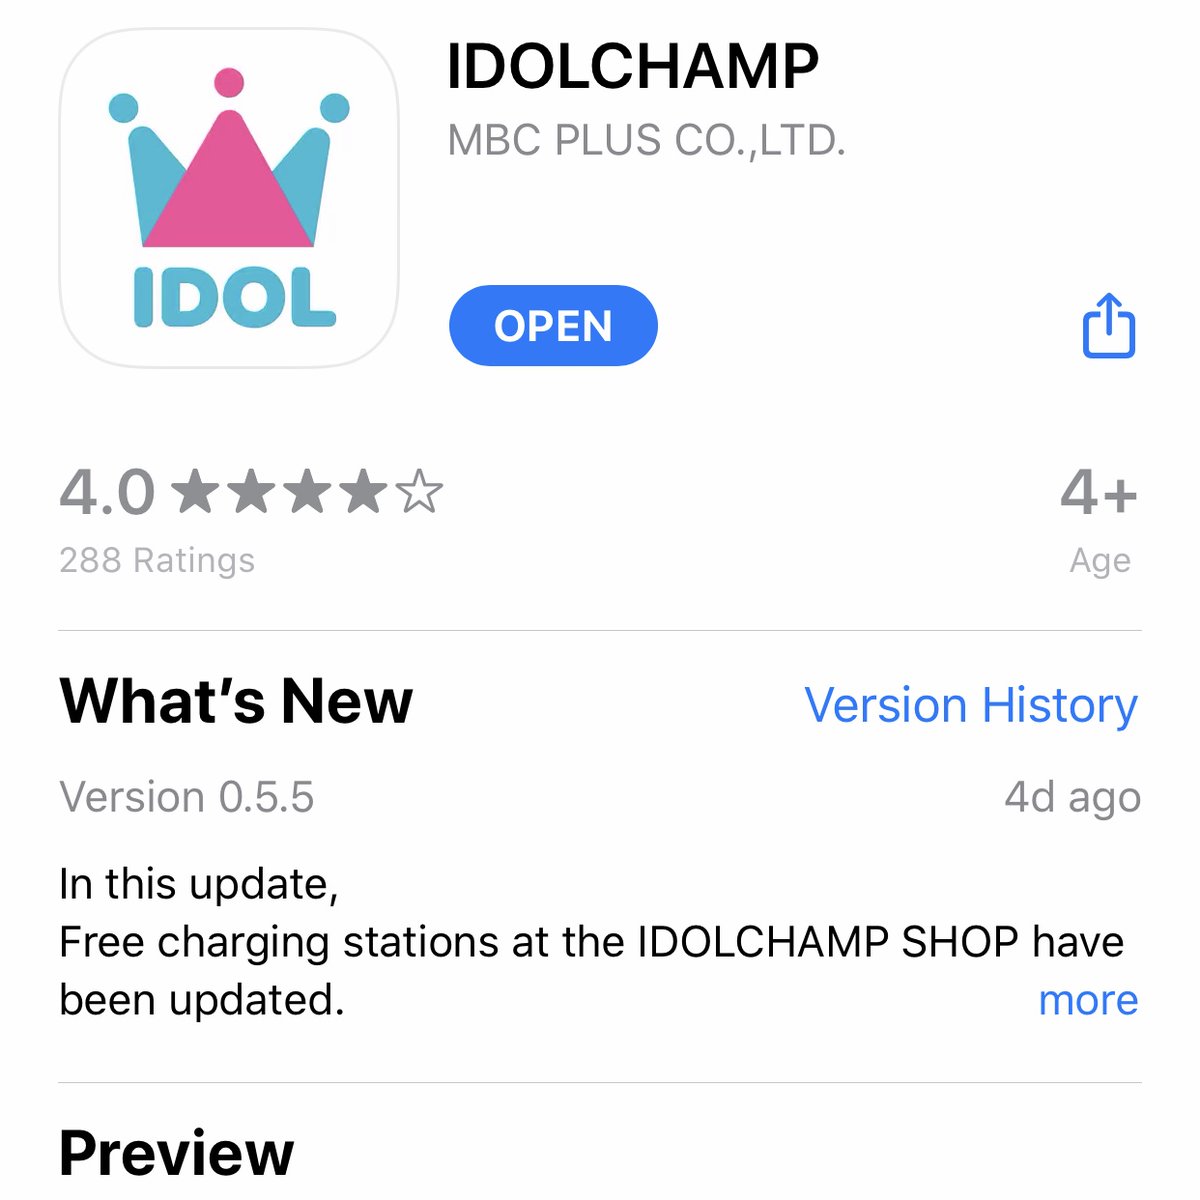 Show Champion uses the app Idol Champ to conduct Pre-Voting